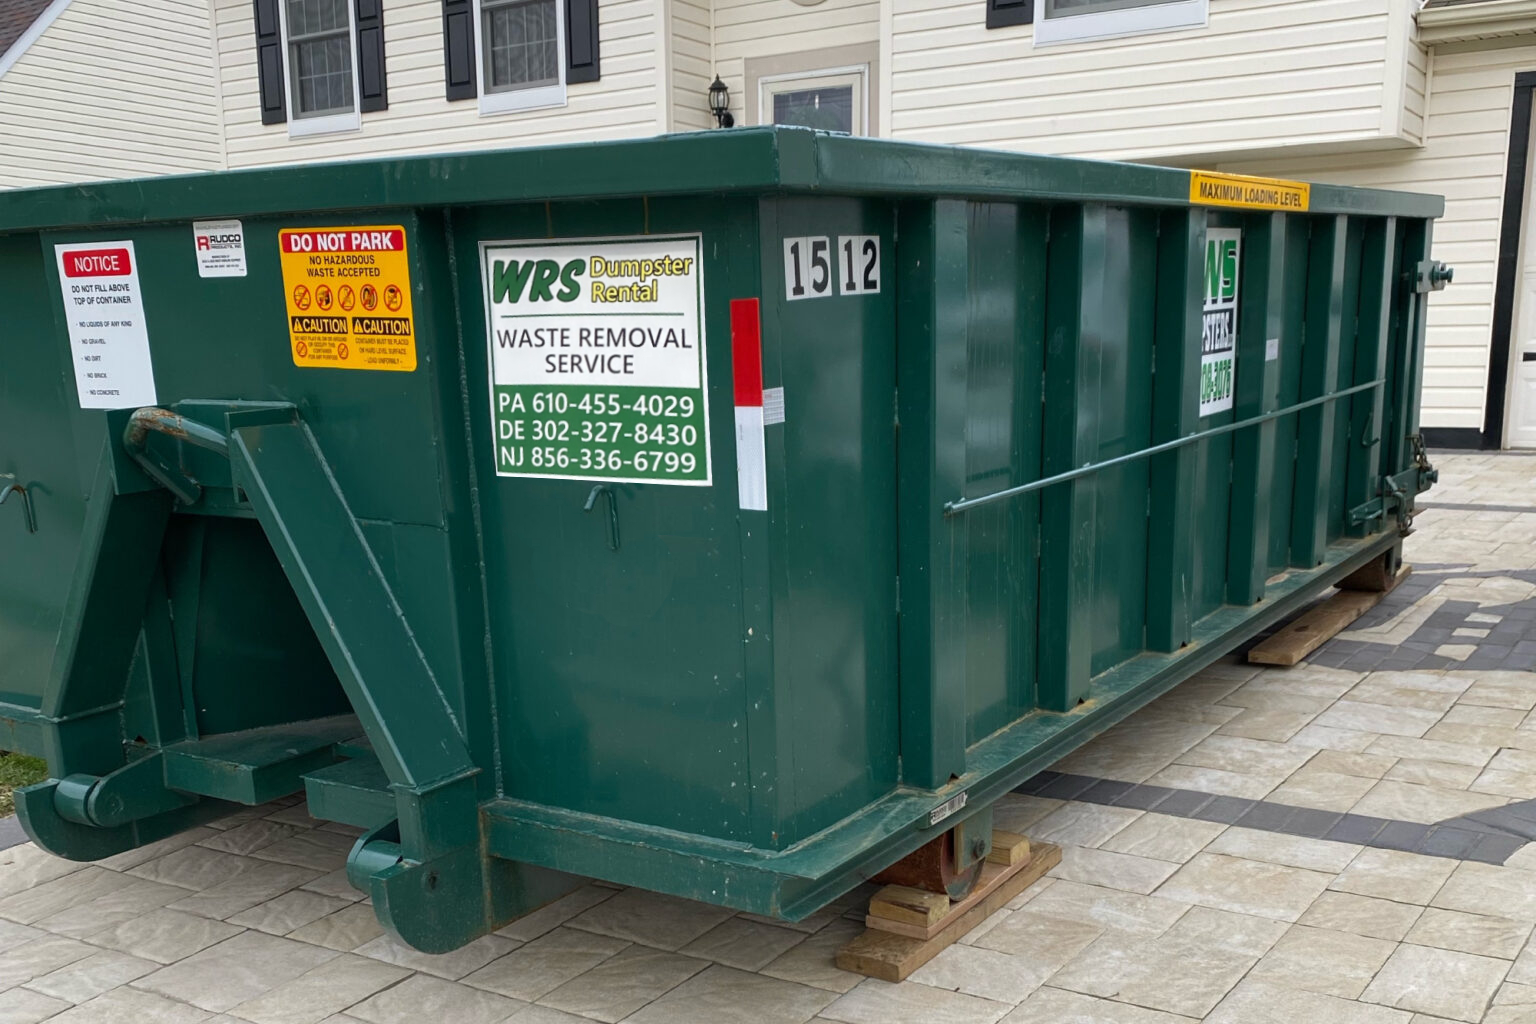 Rental Dumpster Services in Collegeville, PA